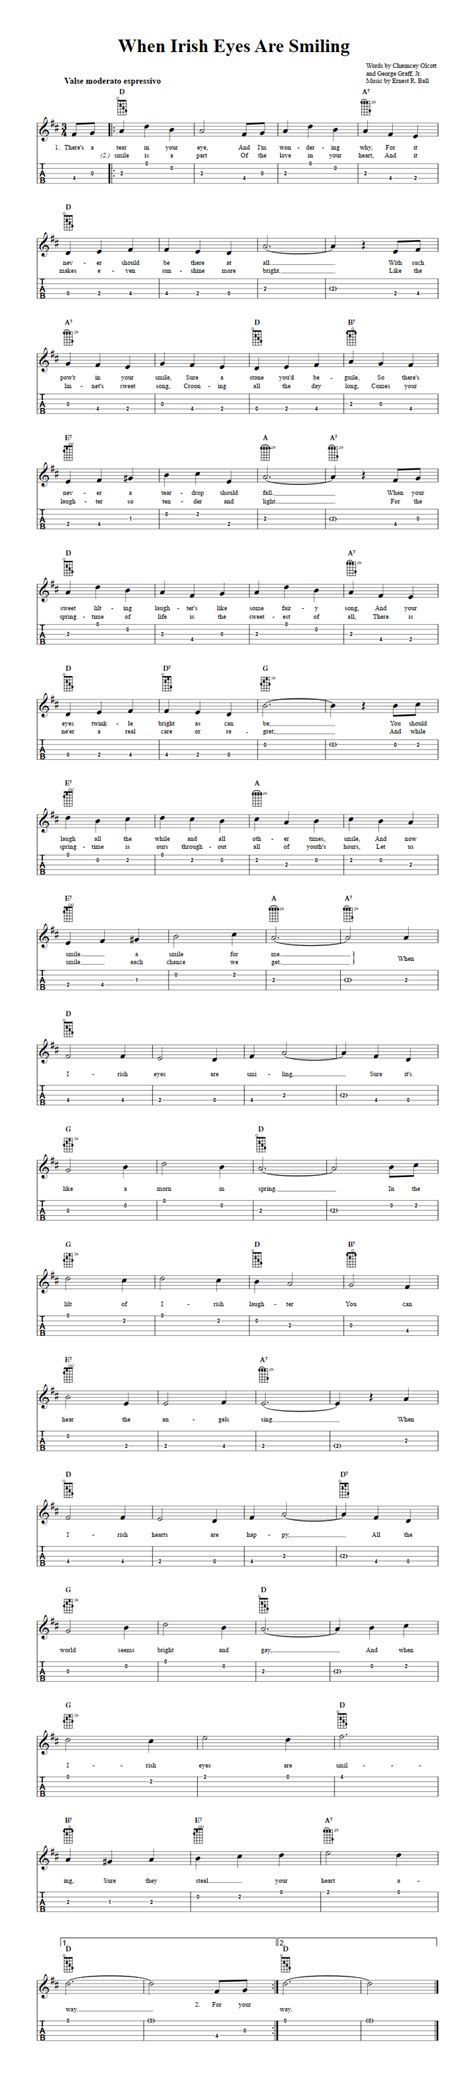 When Irish Eyes Are Smiling Chords Sheet Music And Tab For Banjo